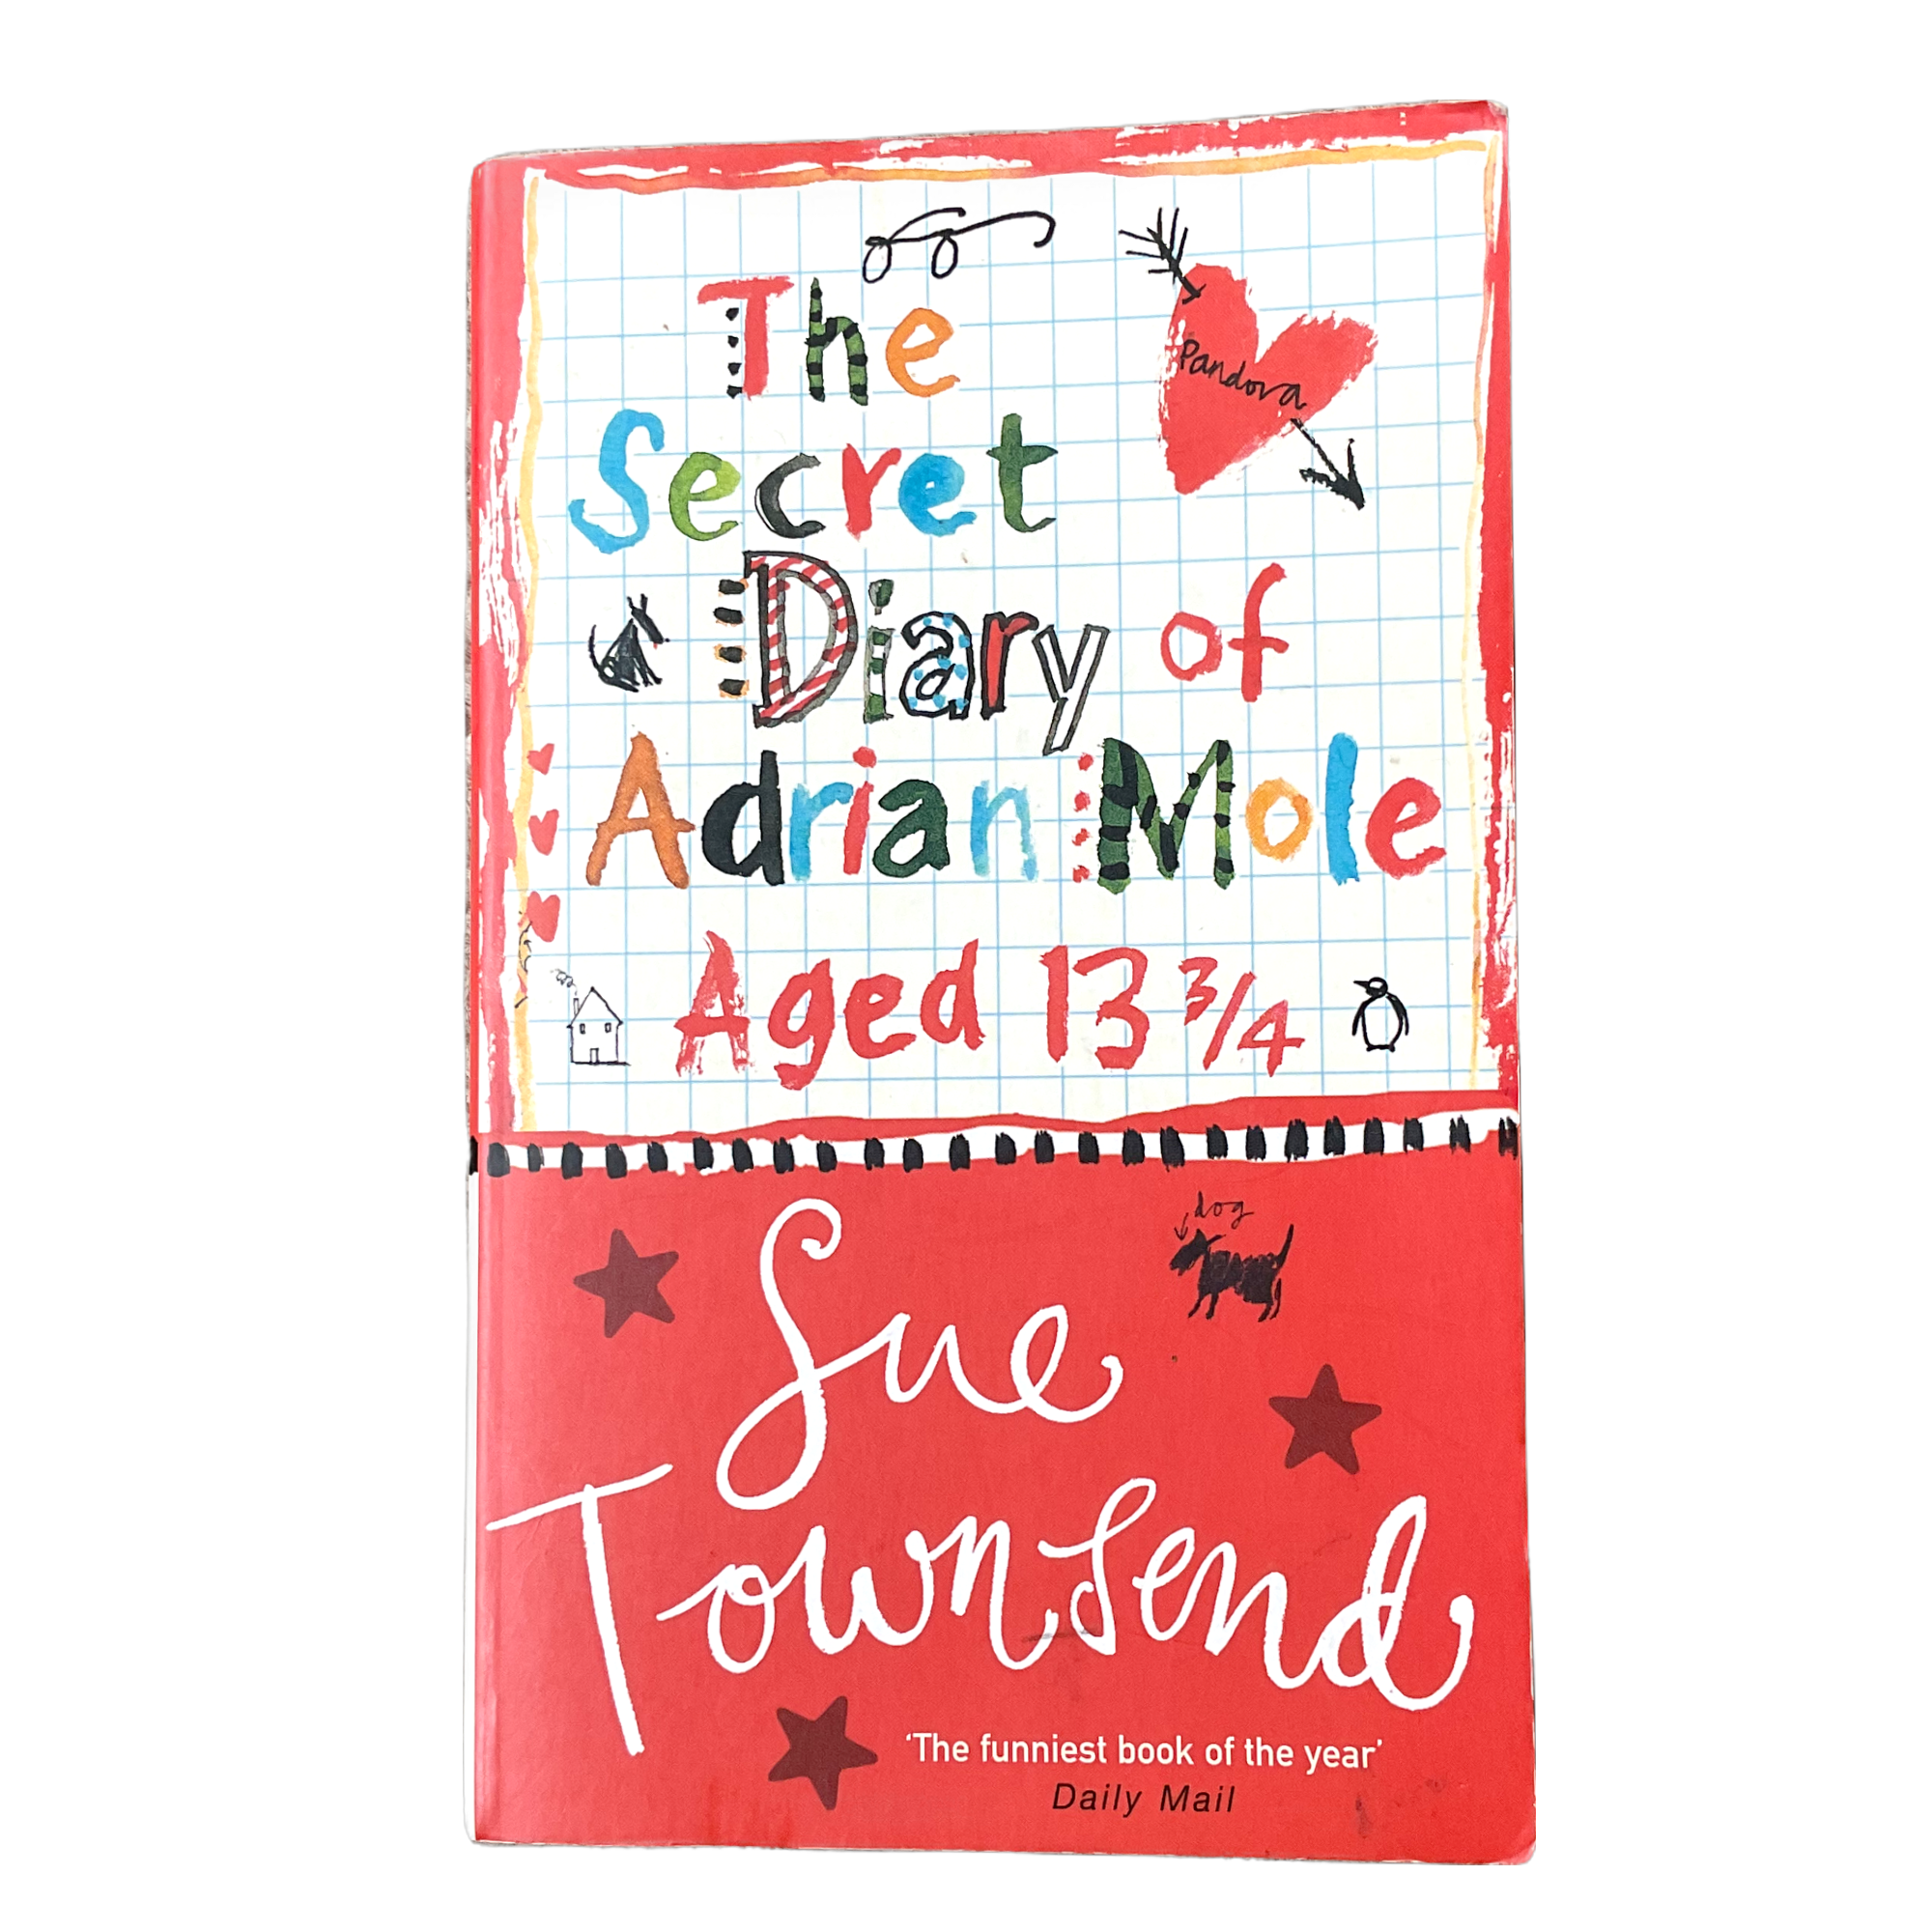 The Secret Diary of Adrian Mole Aged 13 3/4 - paperback